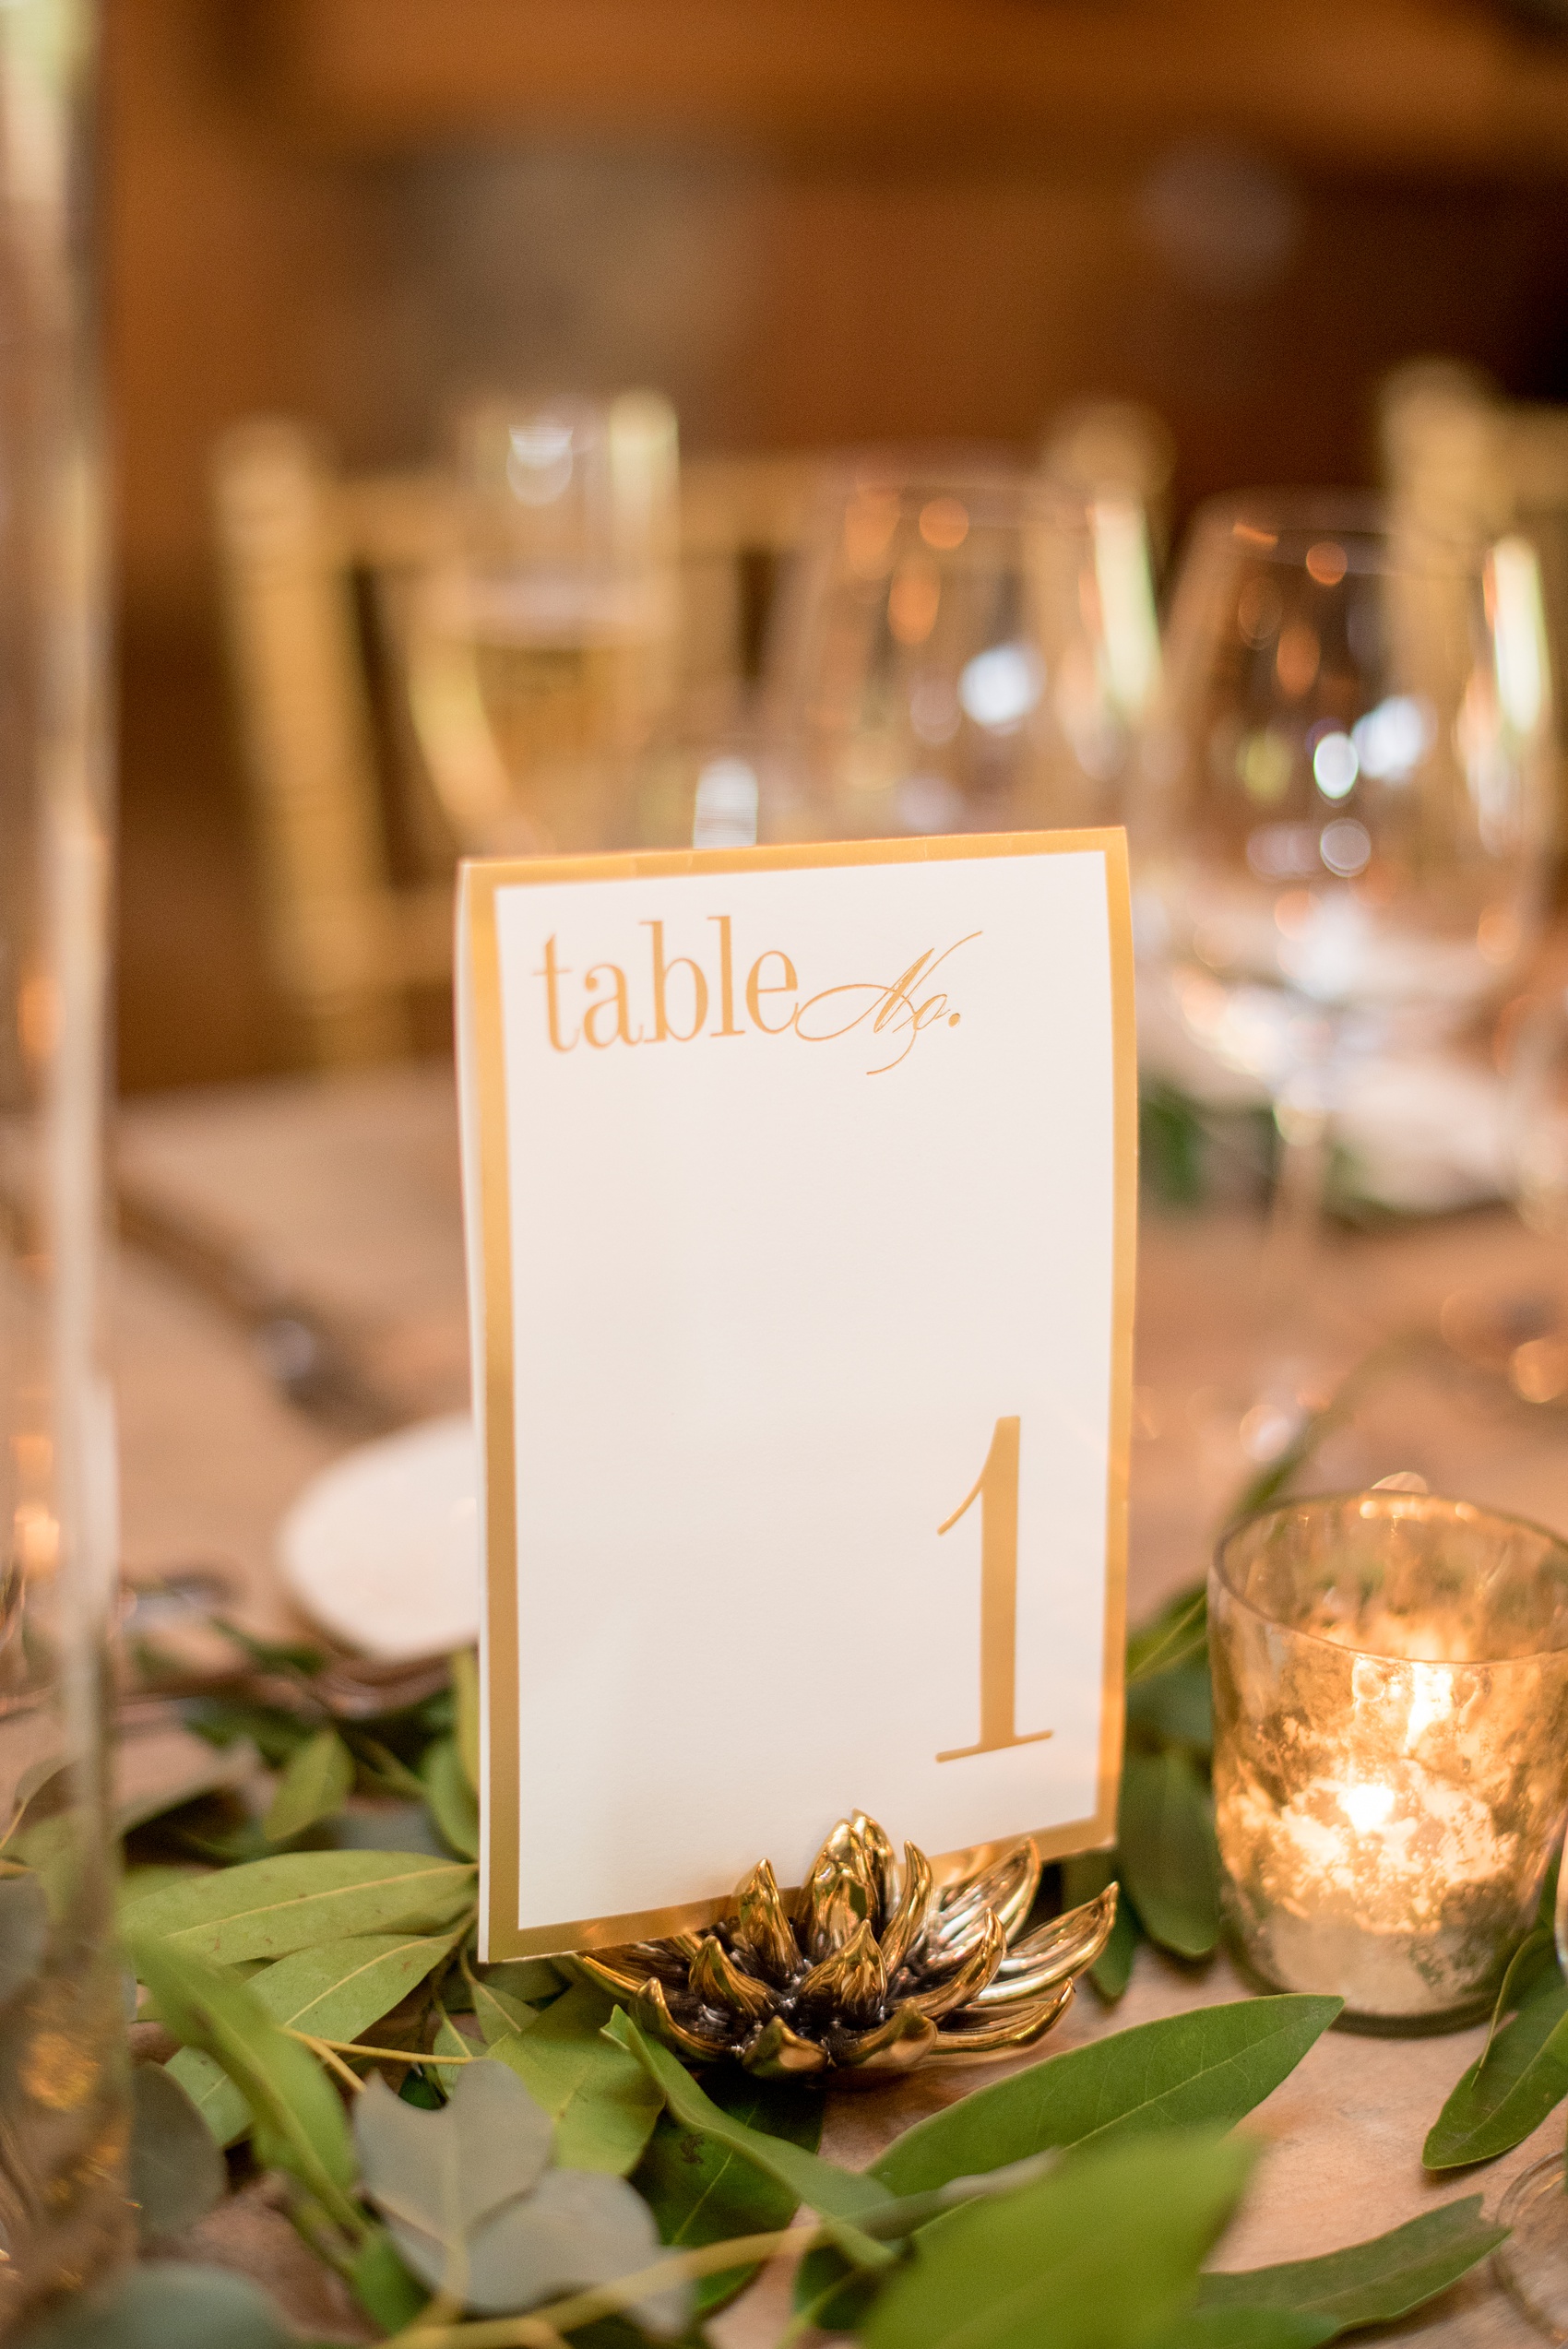 Pavilion at Angus Barn wedding photos by Mikkel Paige Photography. Picture of the classic gold table numbers.